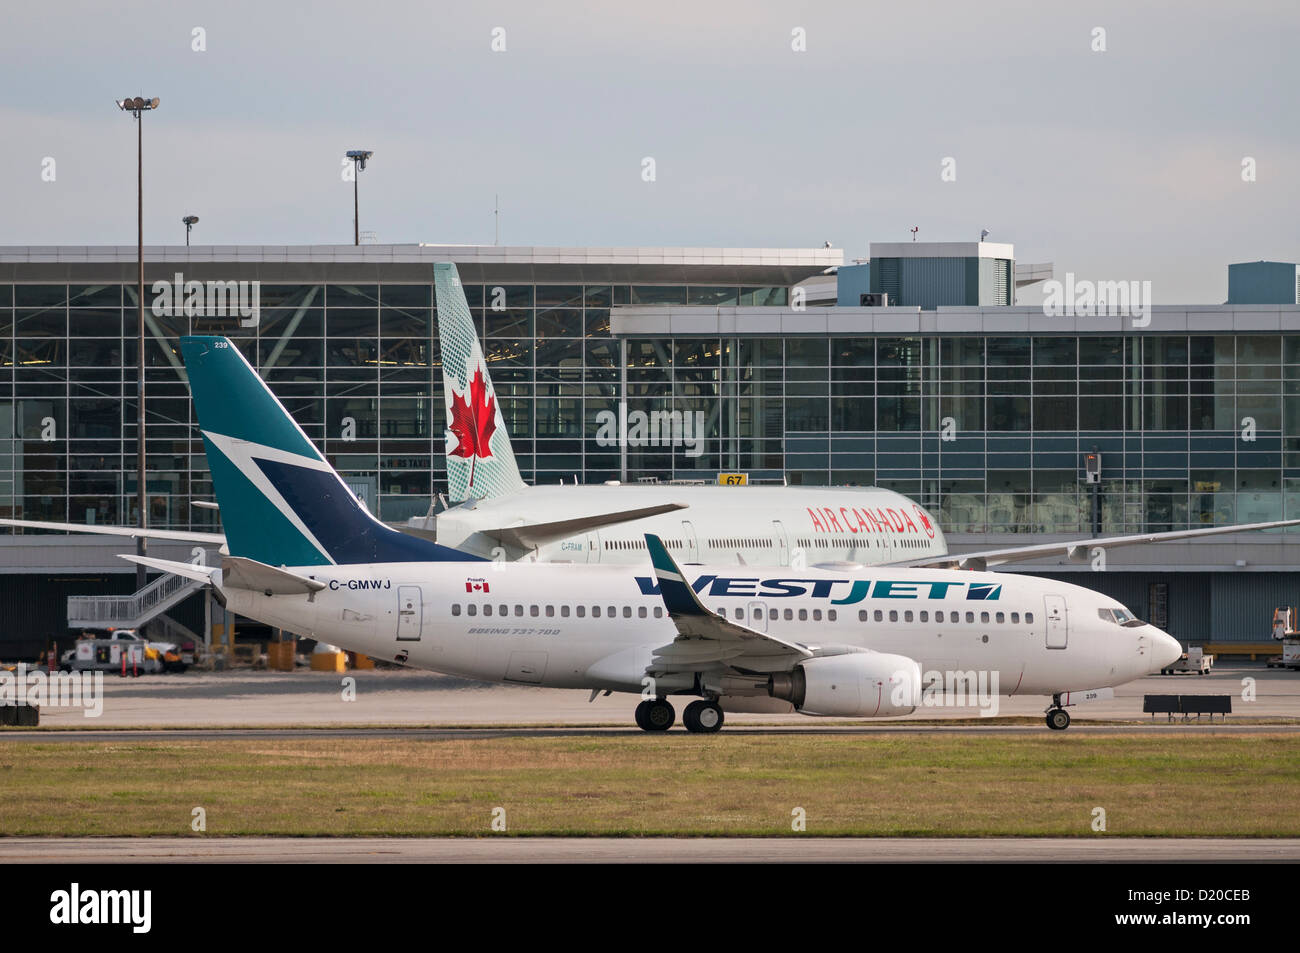 A Westjet Boeing 737 (737-700) jetliner taxies by an Air Canada Boeing 777 (777-300ER) passenger jet. Stock Photo